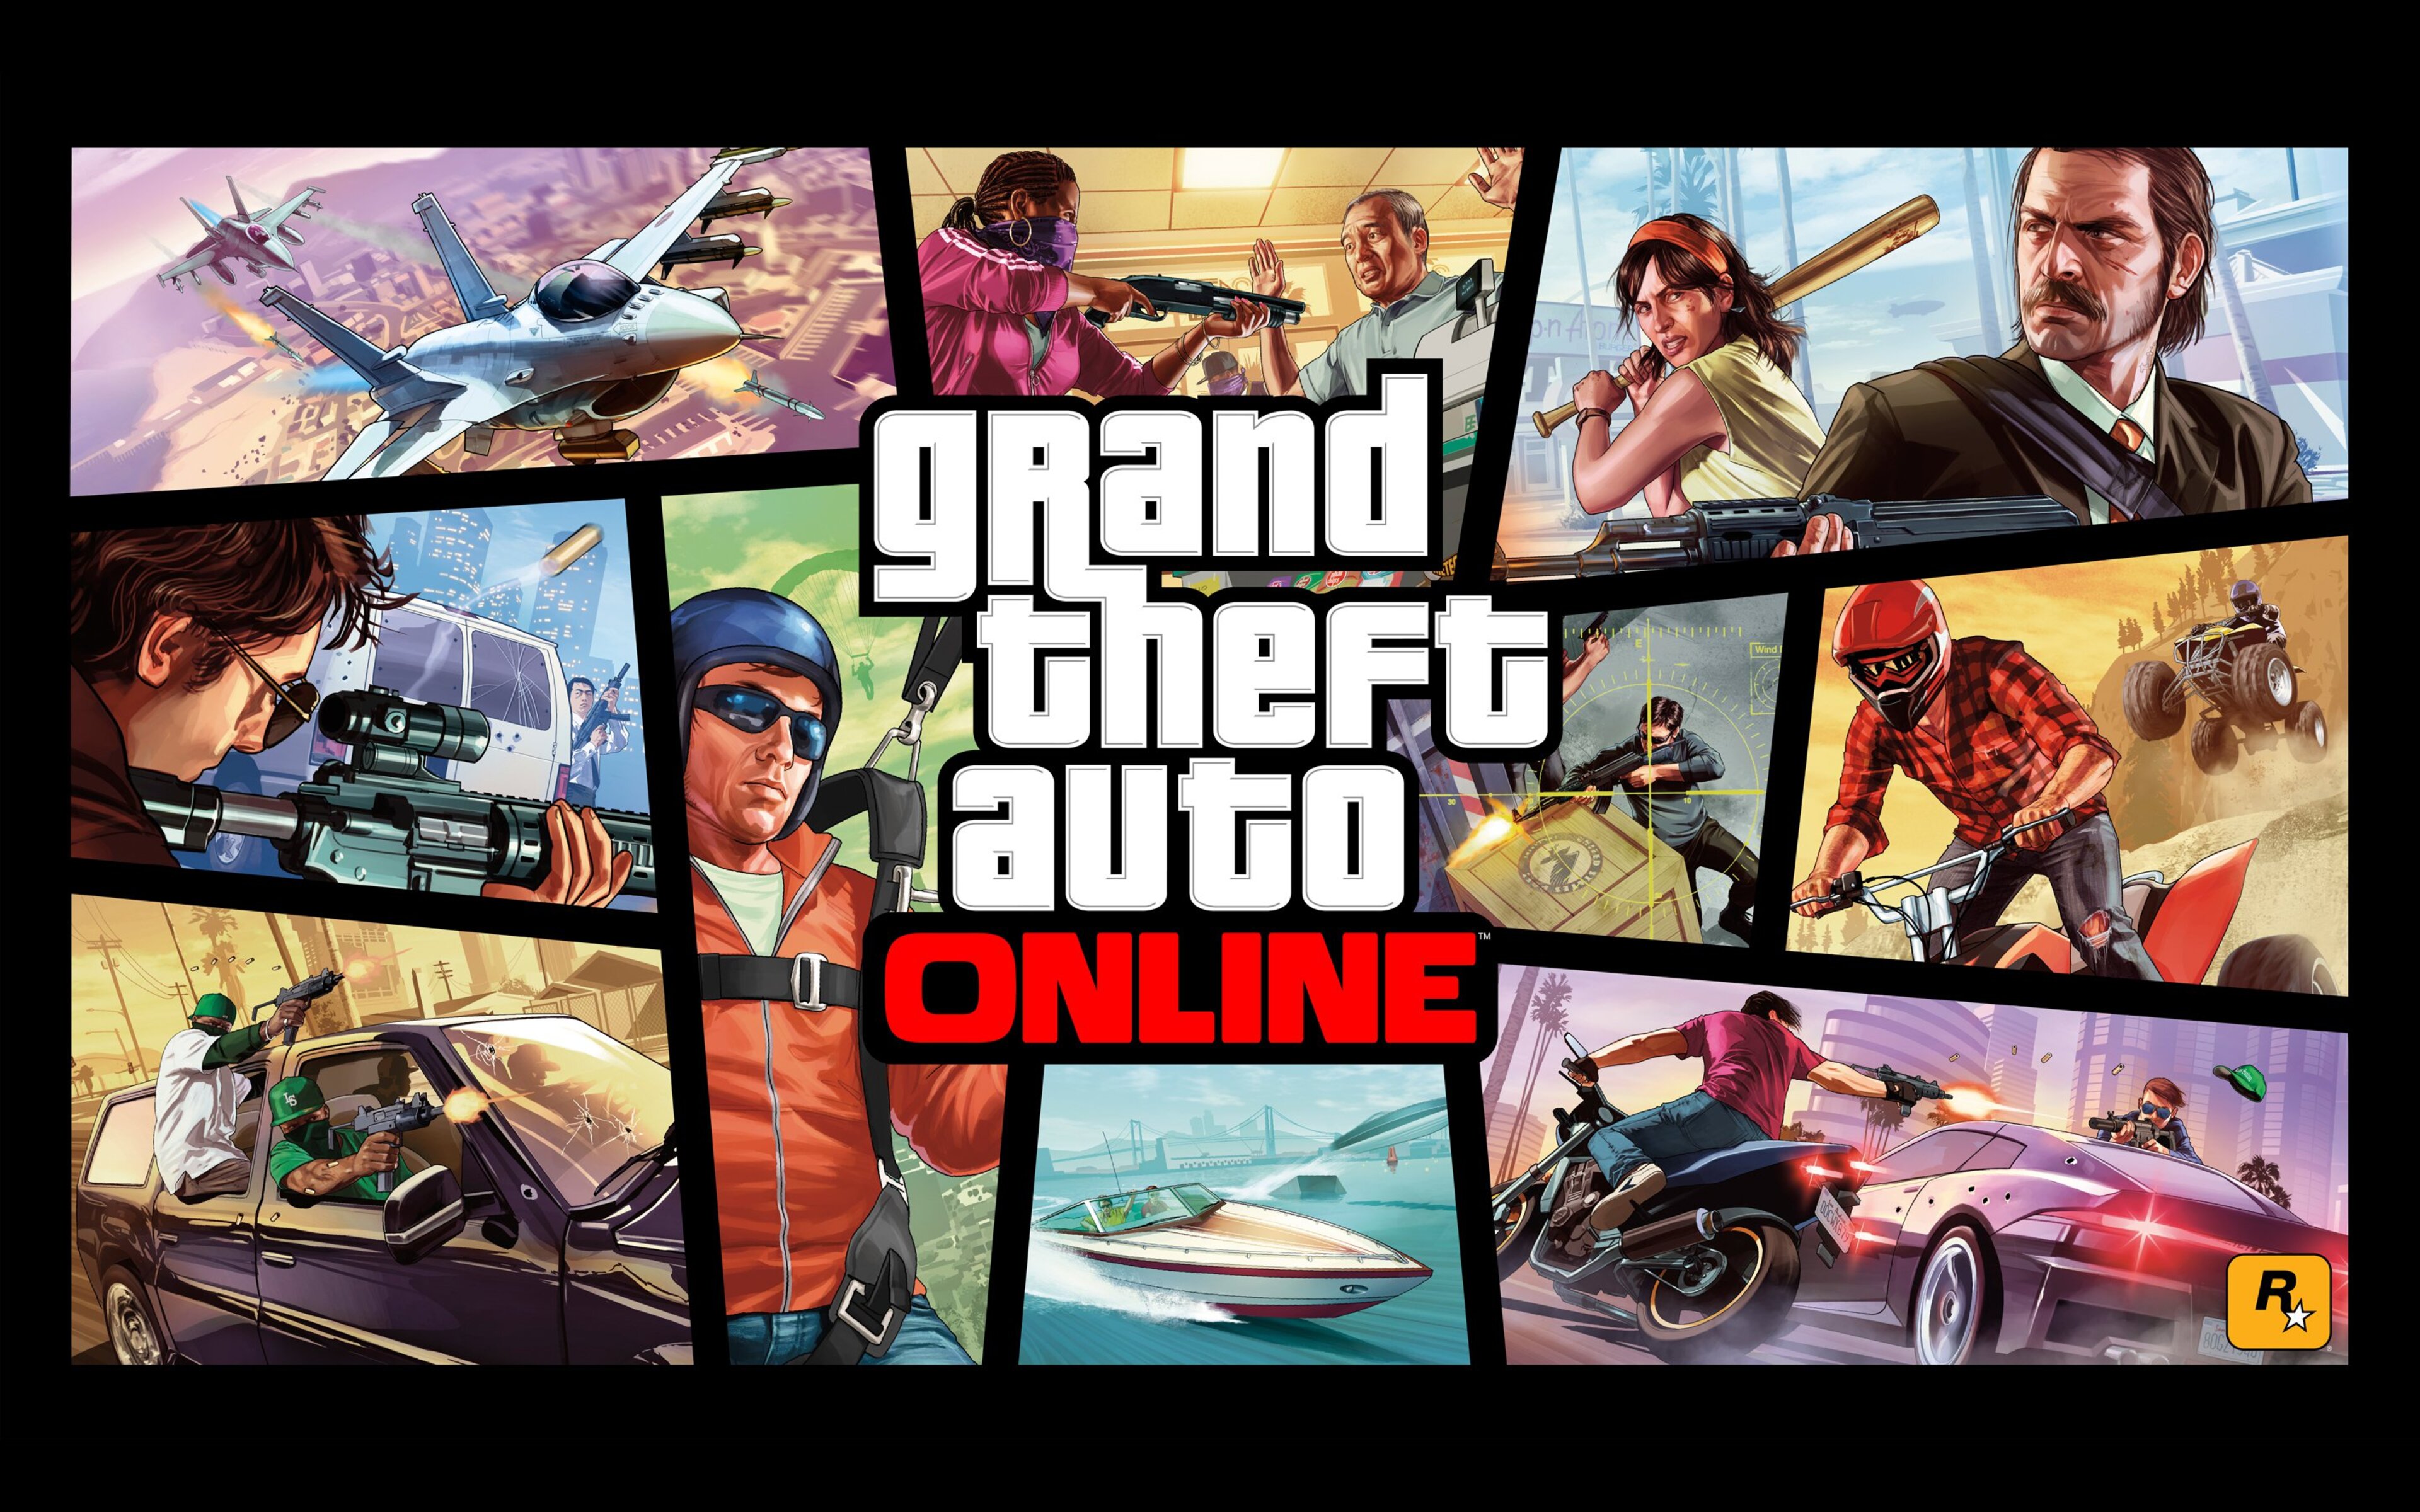 is rockstar going to fix the gta online pc hacking